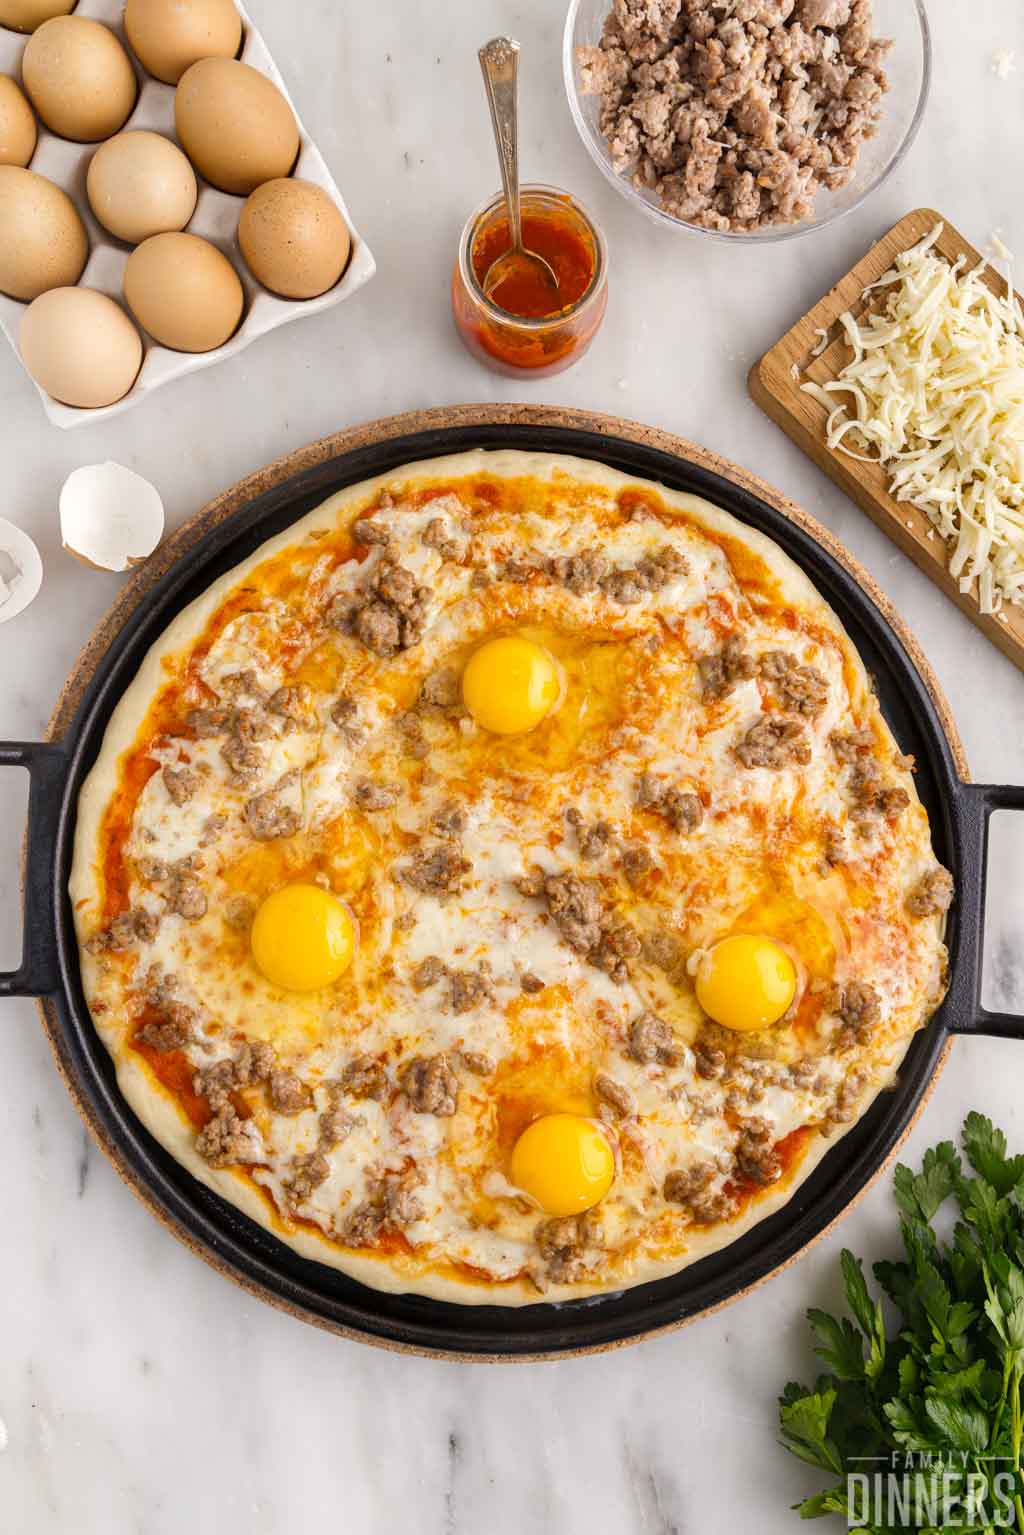 4 raw eggs on semi-cooked breakfast pizza.